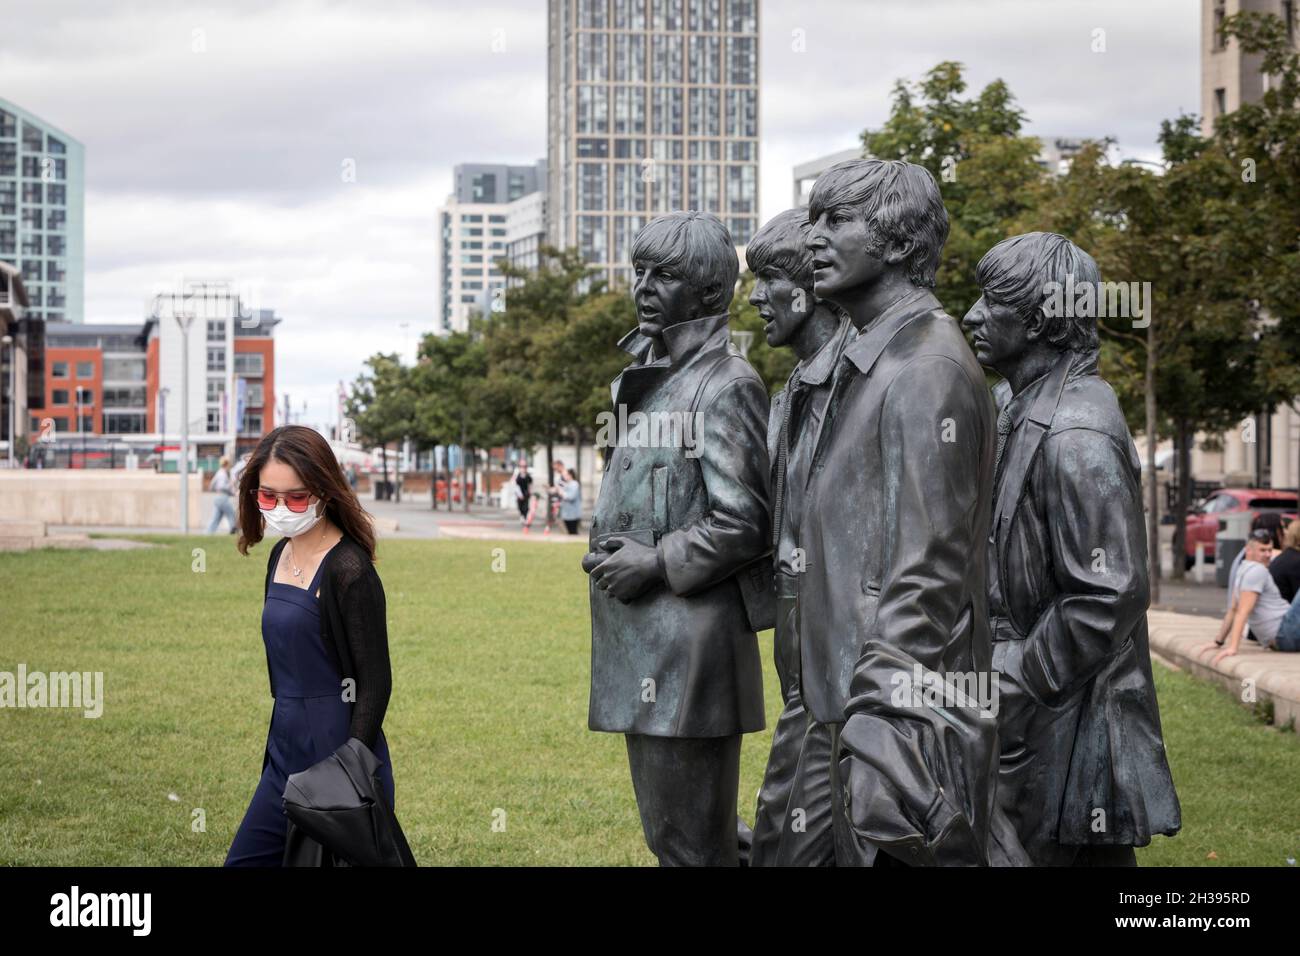 A visitor poses with the bronze statues of the Beatles at Pier Head, Liverpool Stock Photo